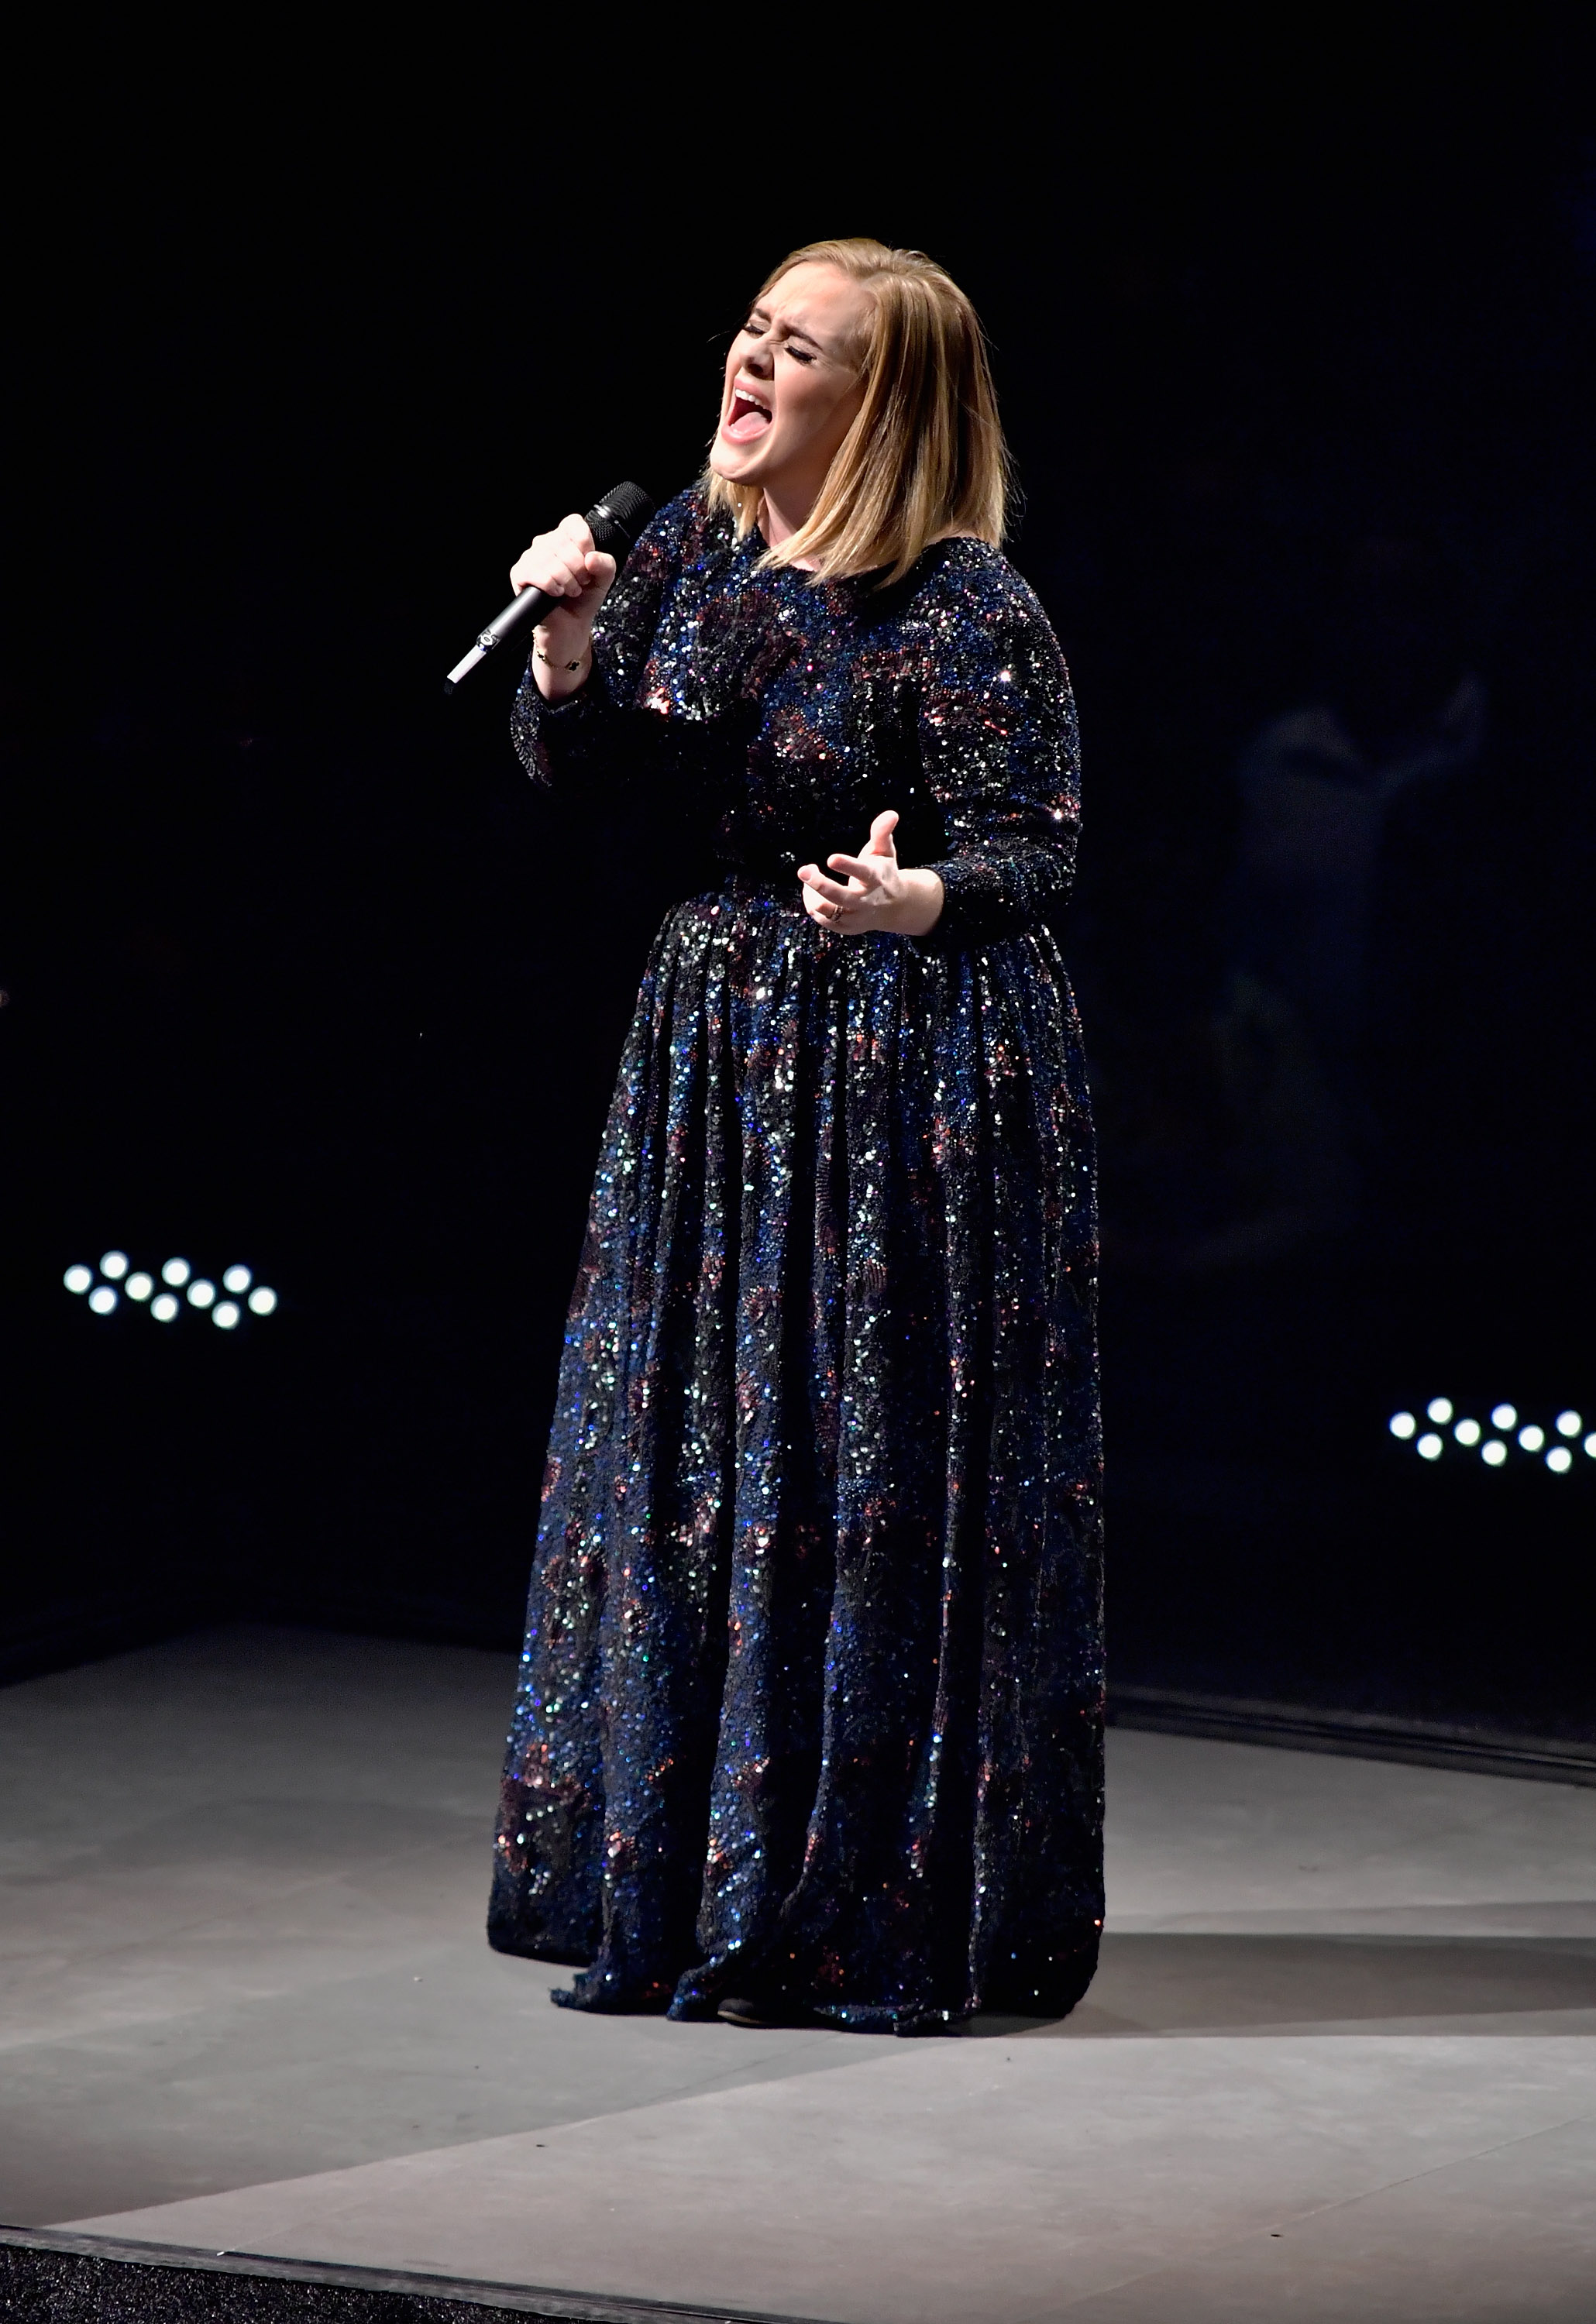 Adele for GETTY IMAGES at TD Garden